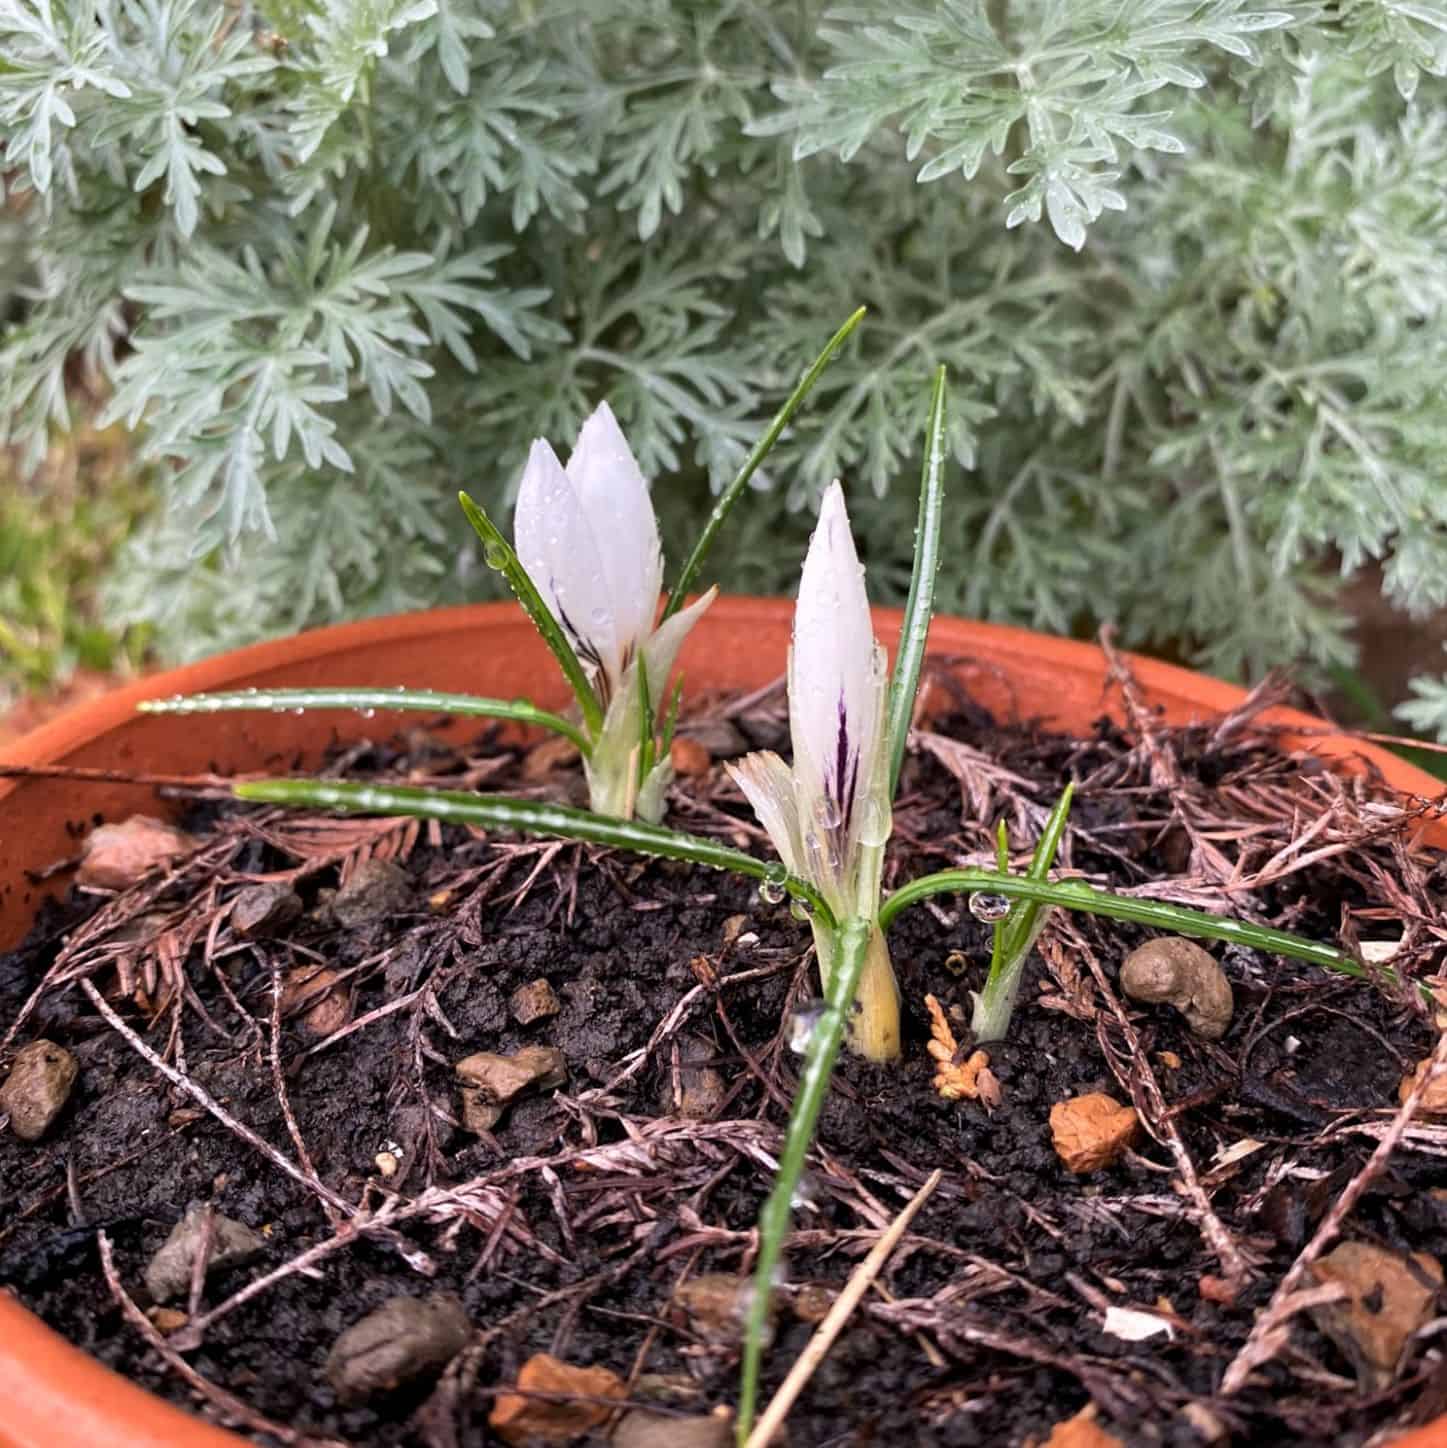 ©2021 Shelley S. Cramm winter crocus before blooming, like a little candle in a pot